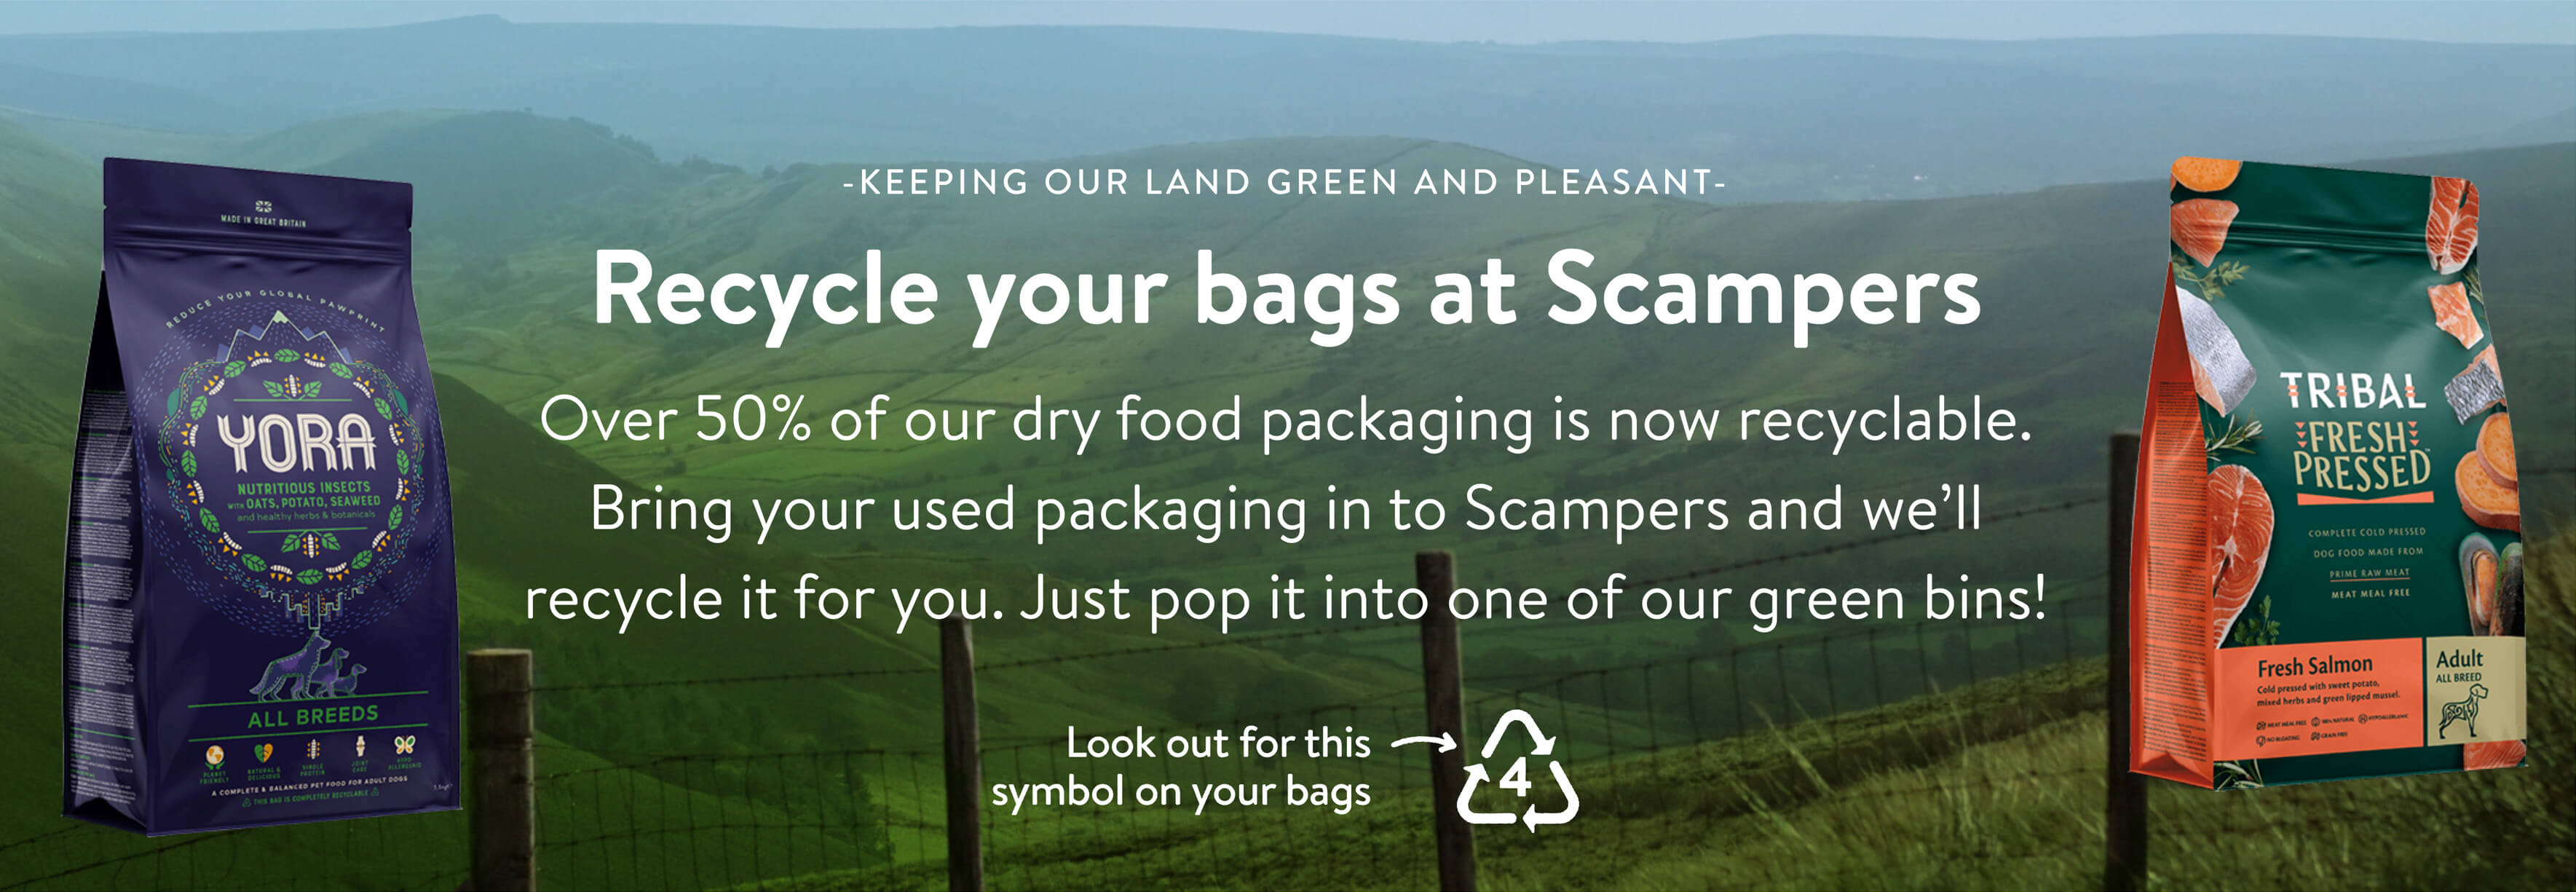 Recycle your bags at Scampers